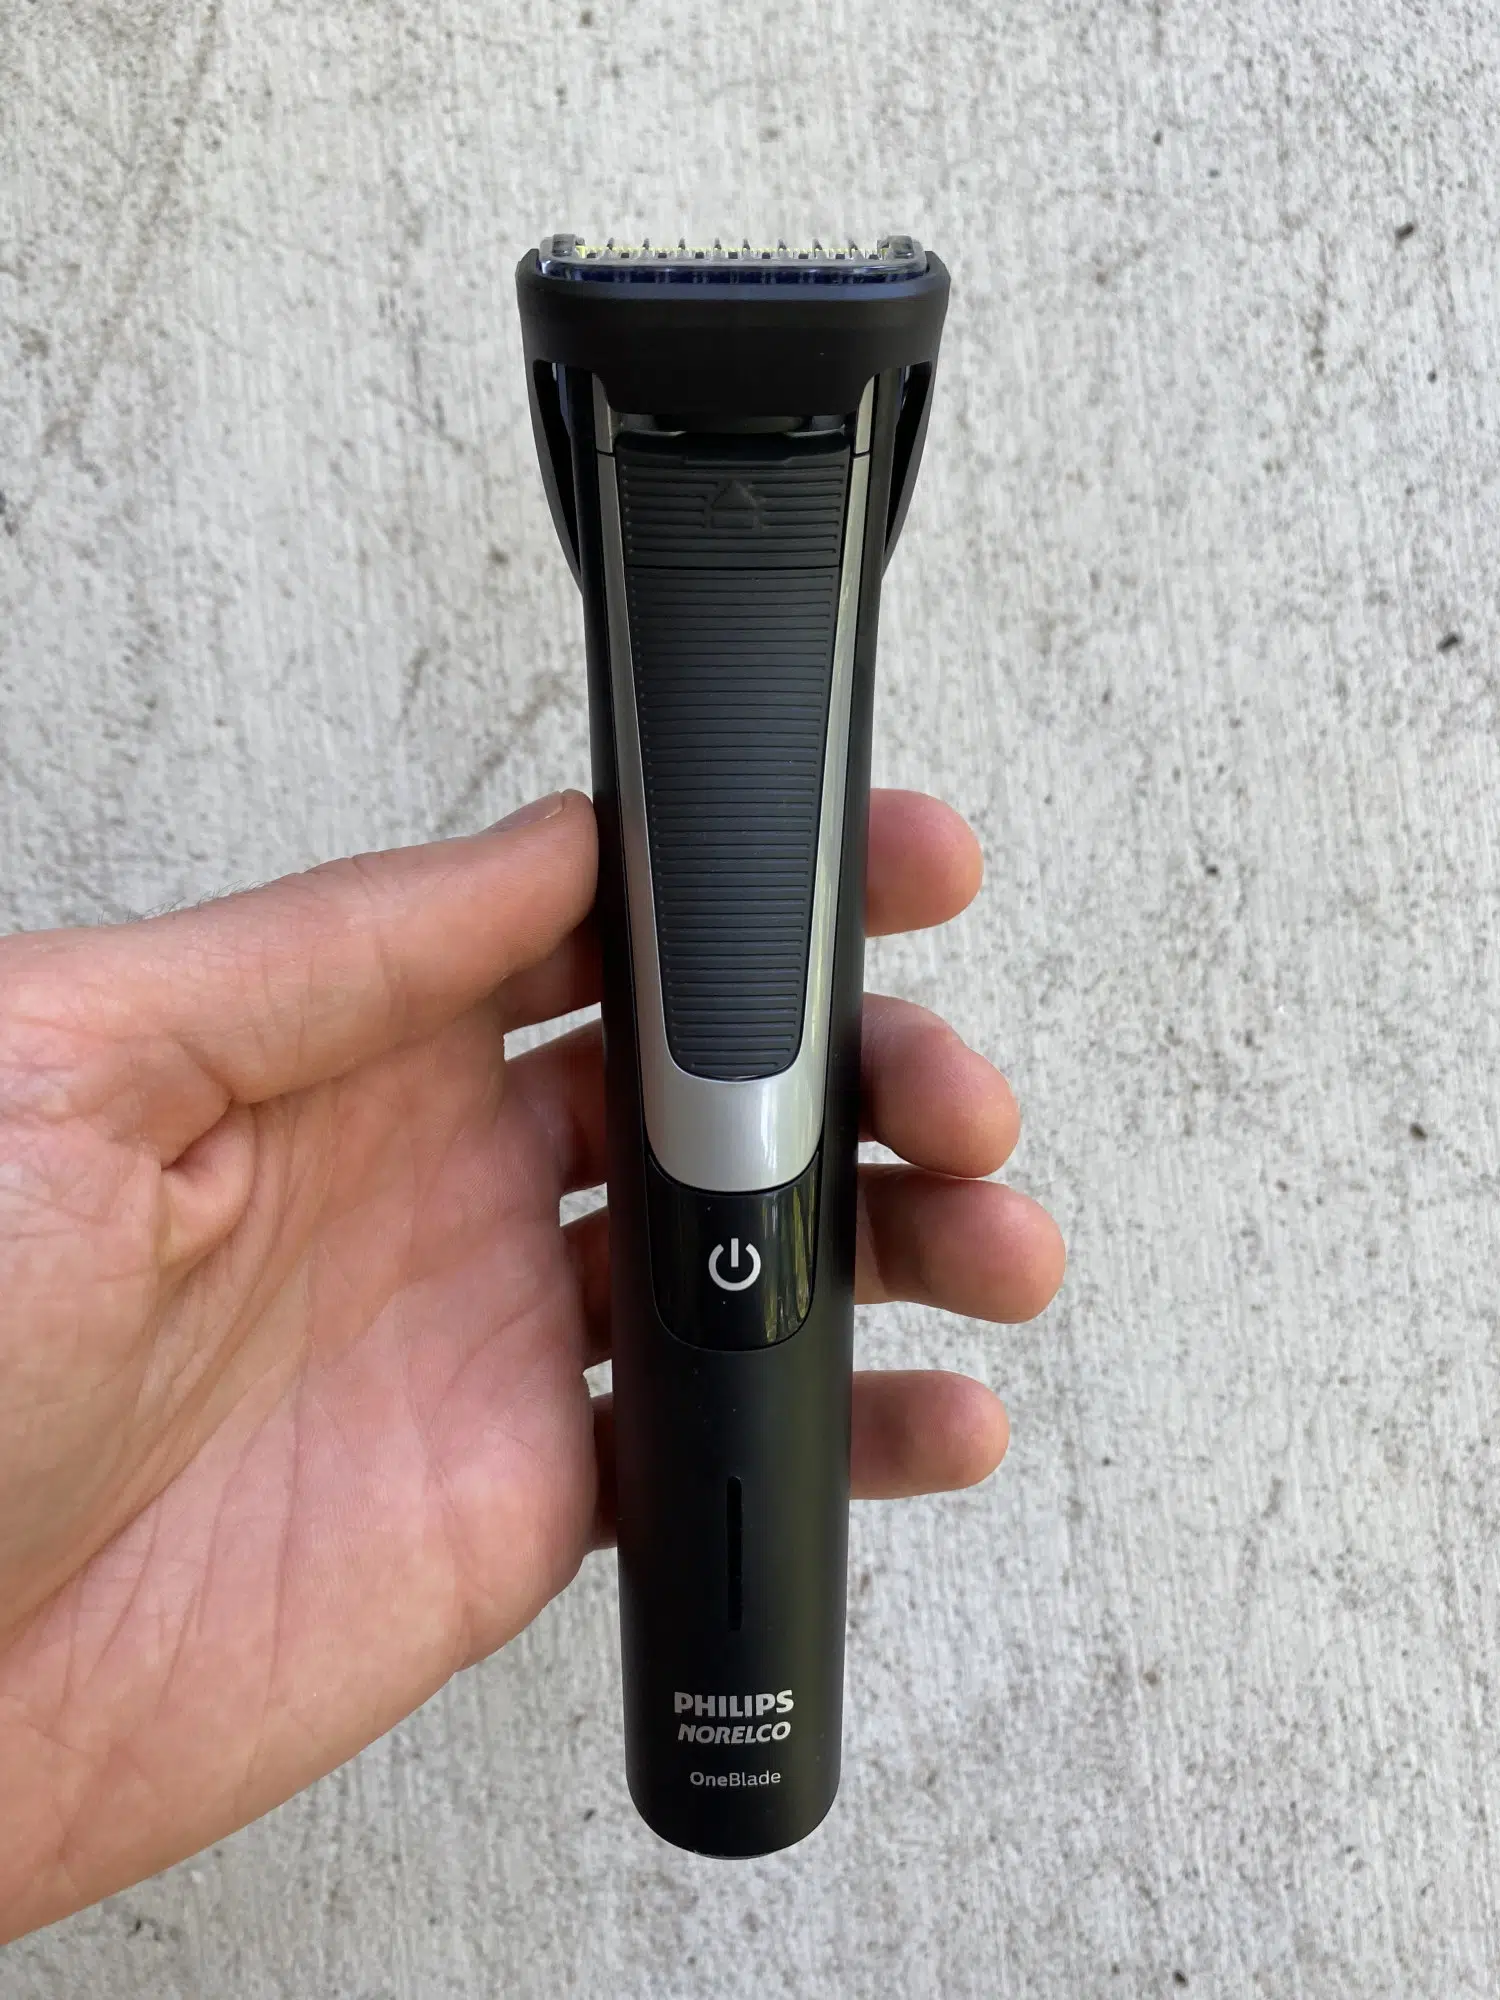 Philips Norelco Oneblade Pro with attachment